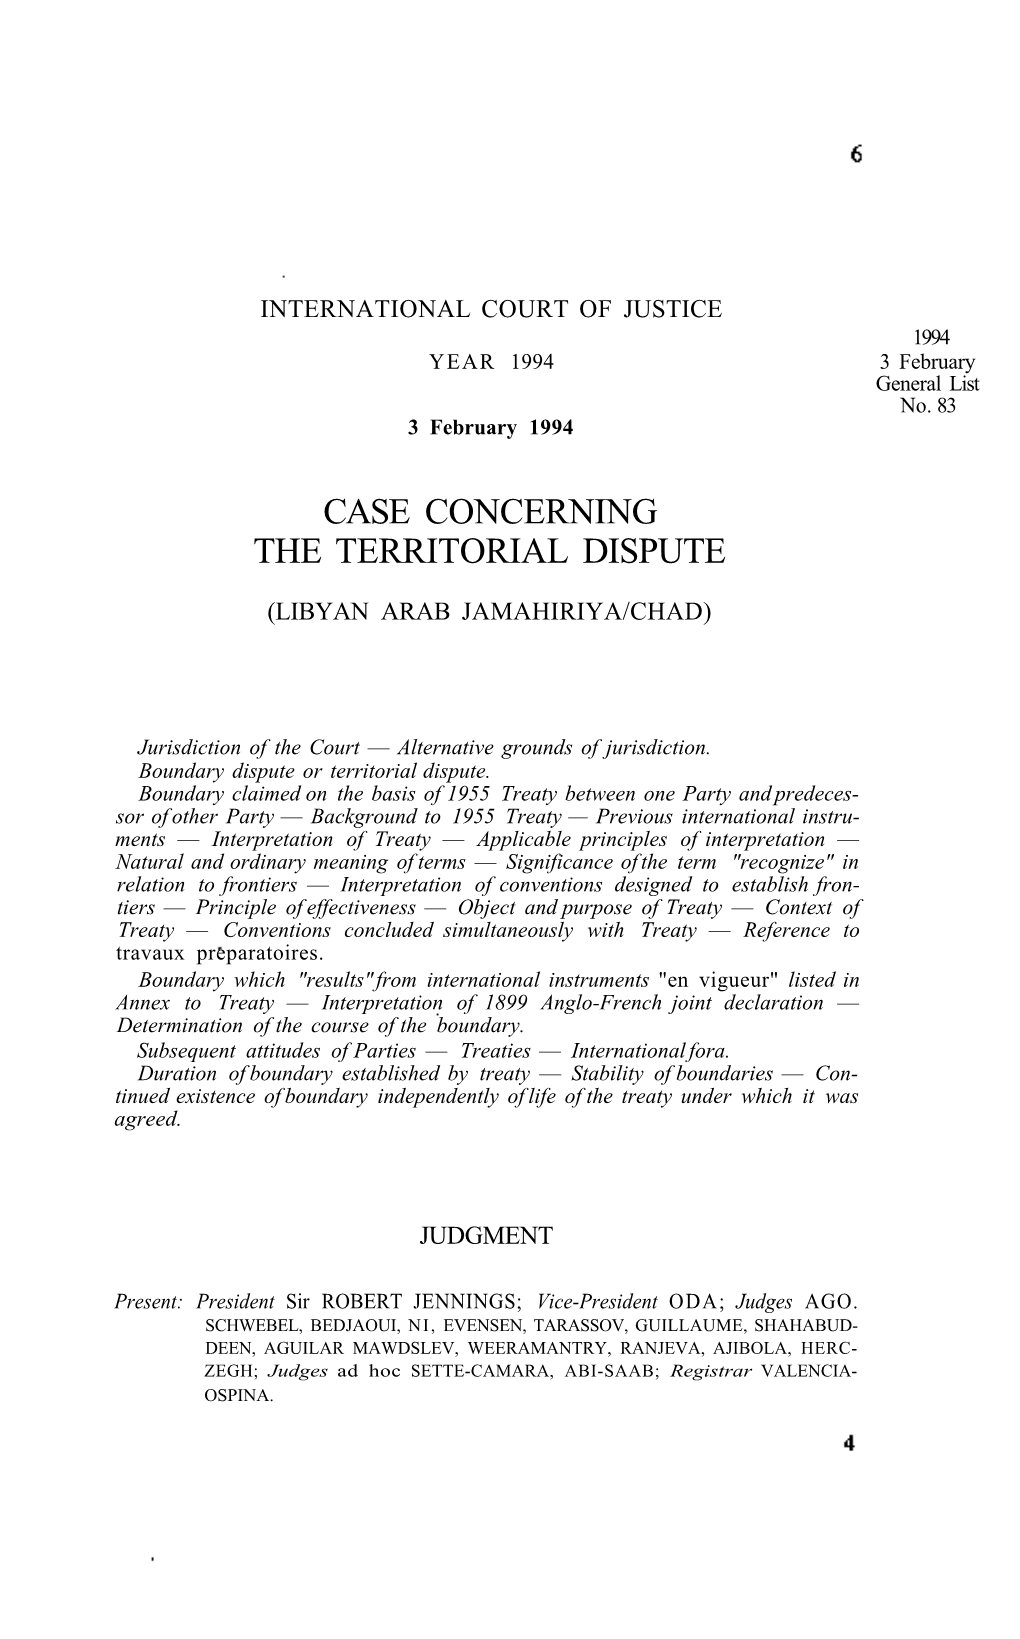 Case Concerning the Territorial Dispute (Libyan